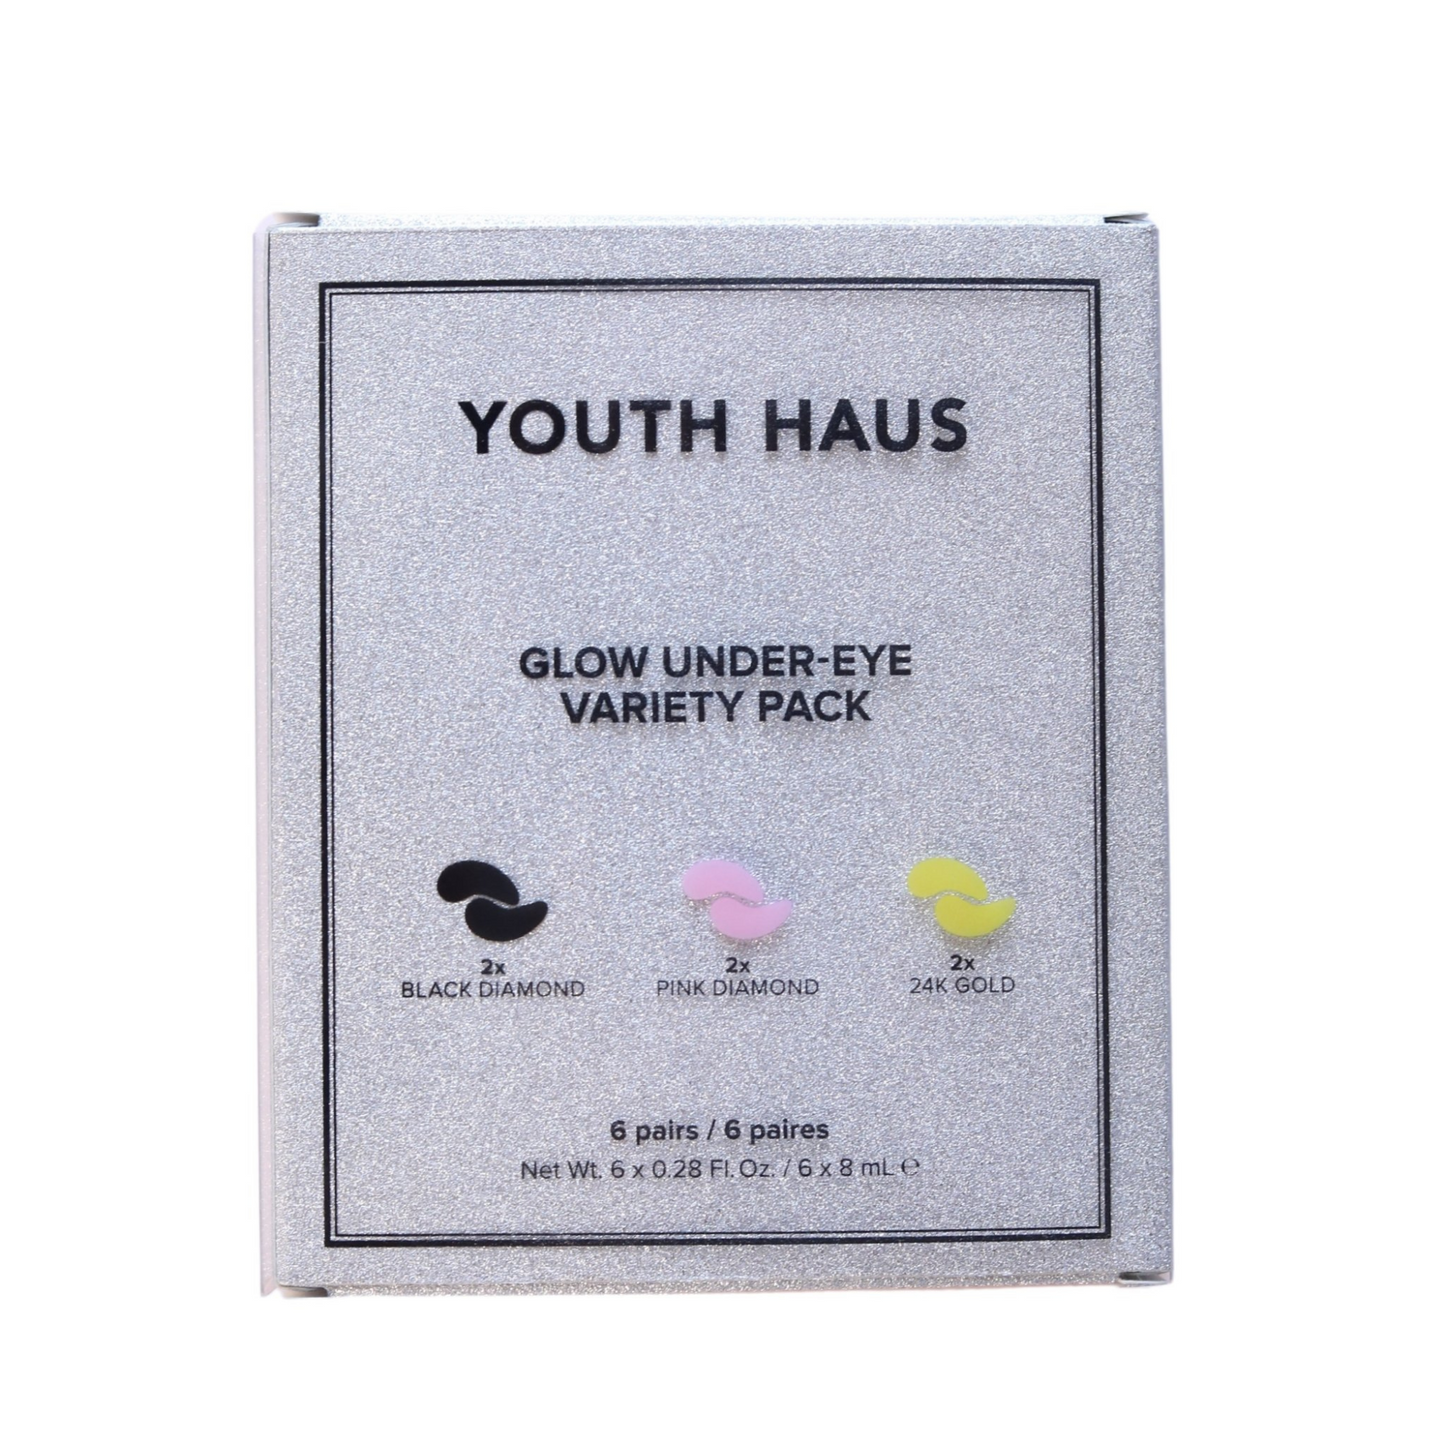 Primary Image of Youth Haus Glow Under-Eye Holiday Variety Pack